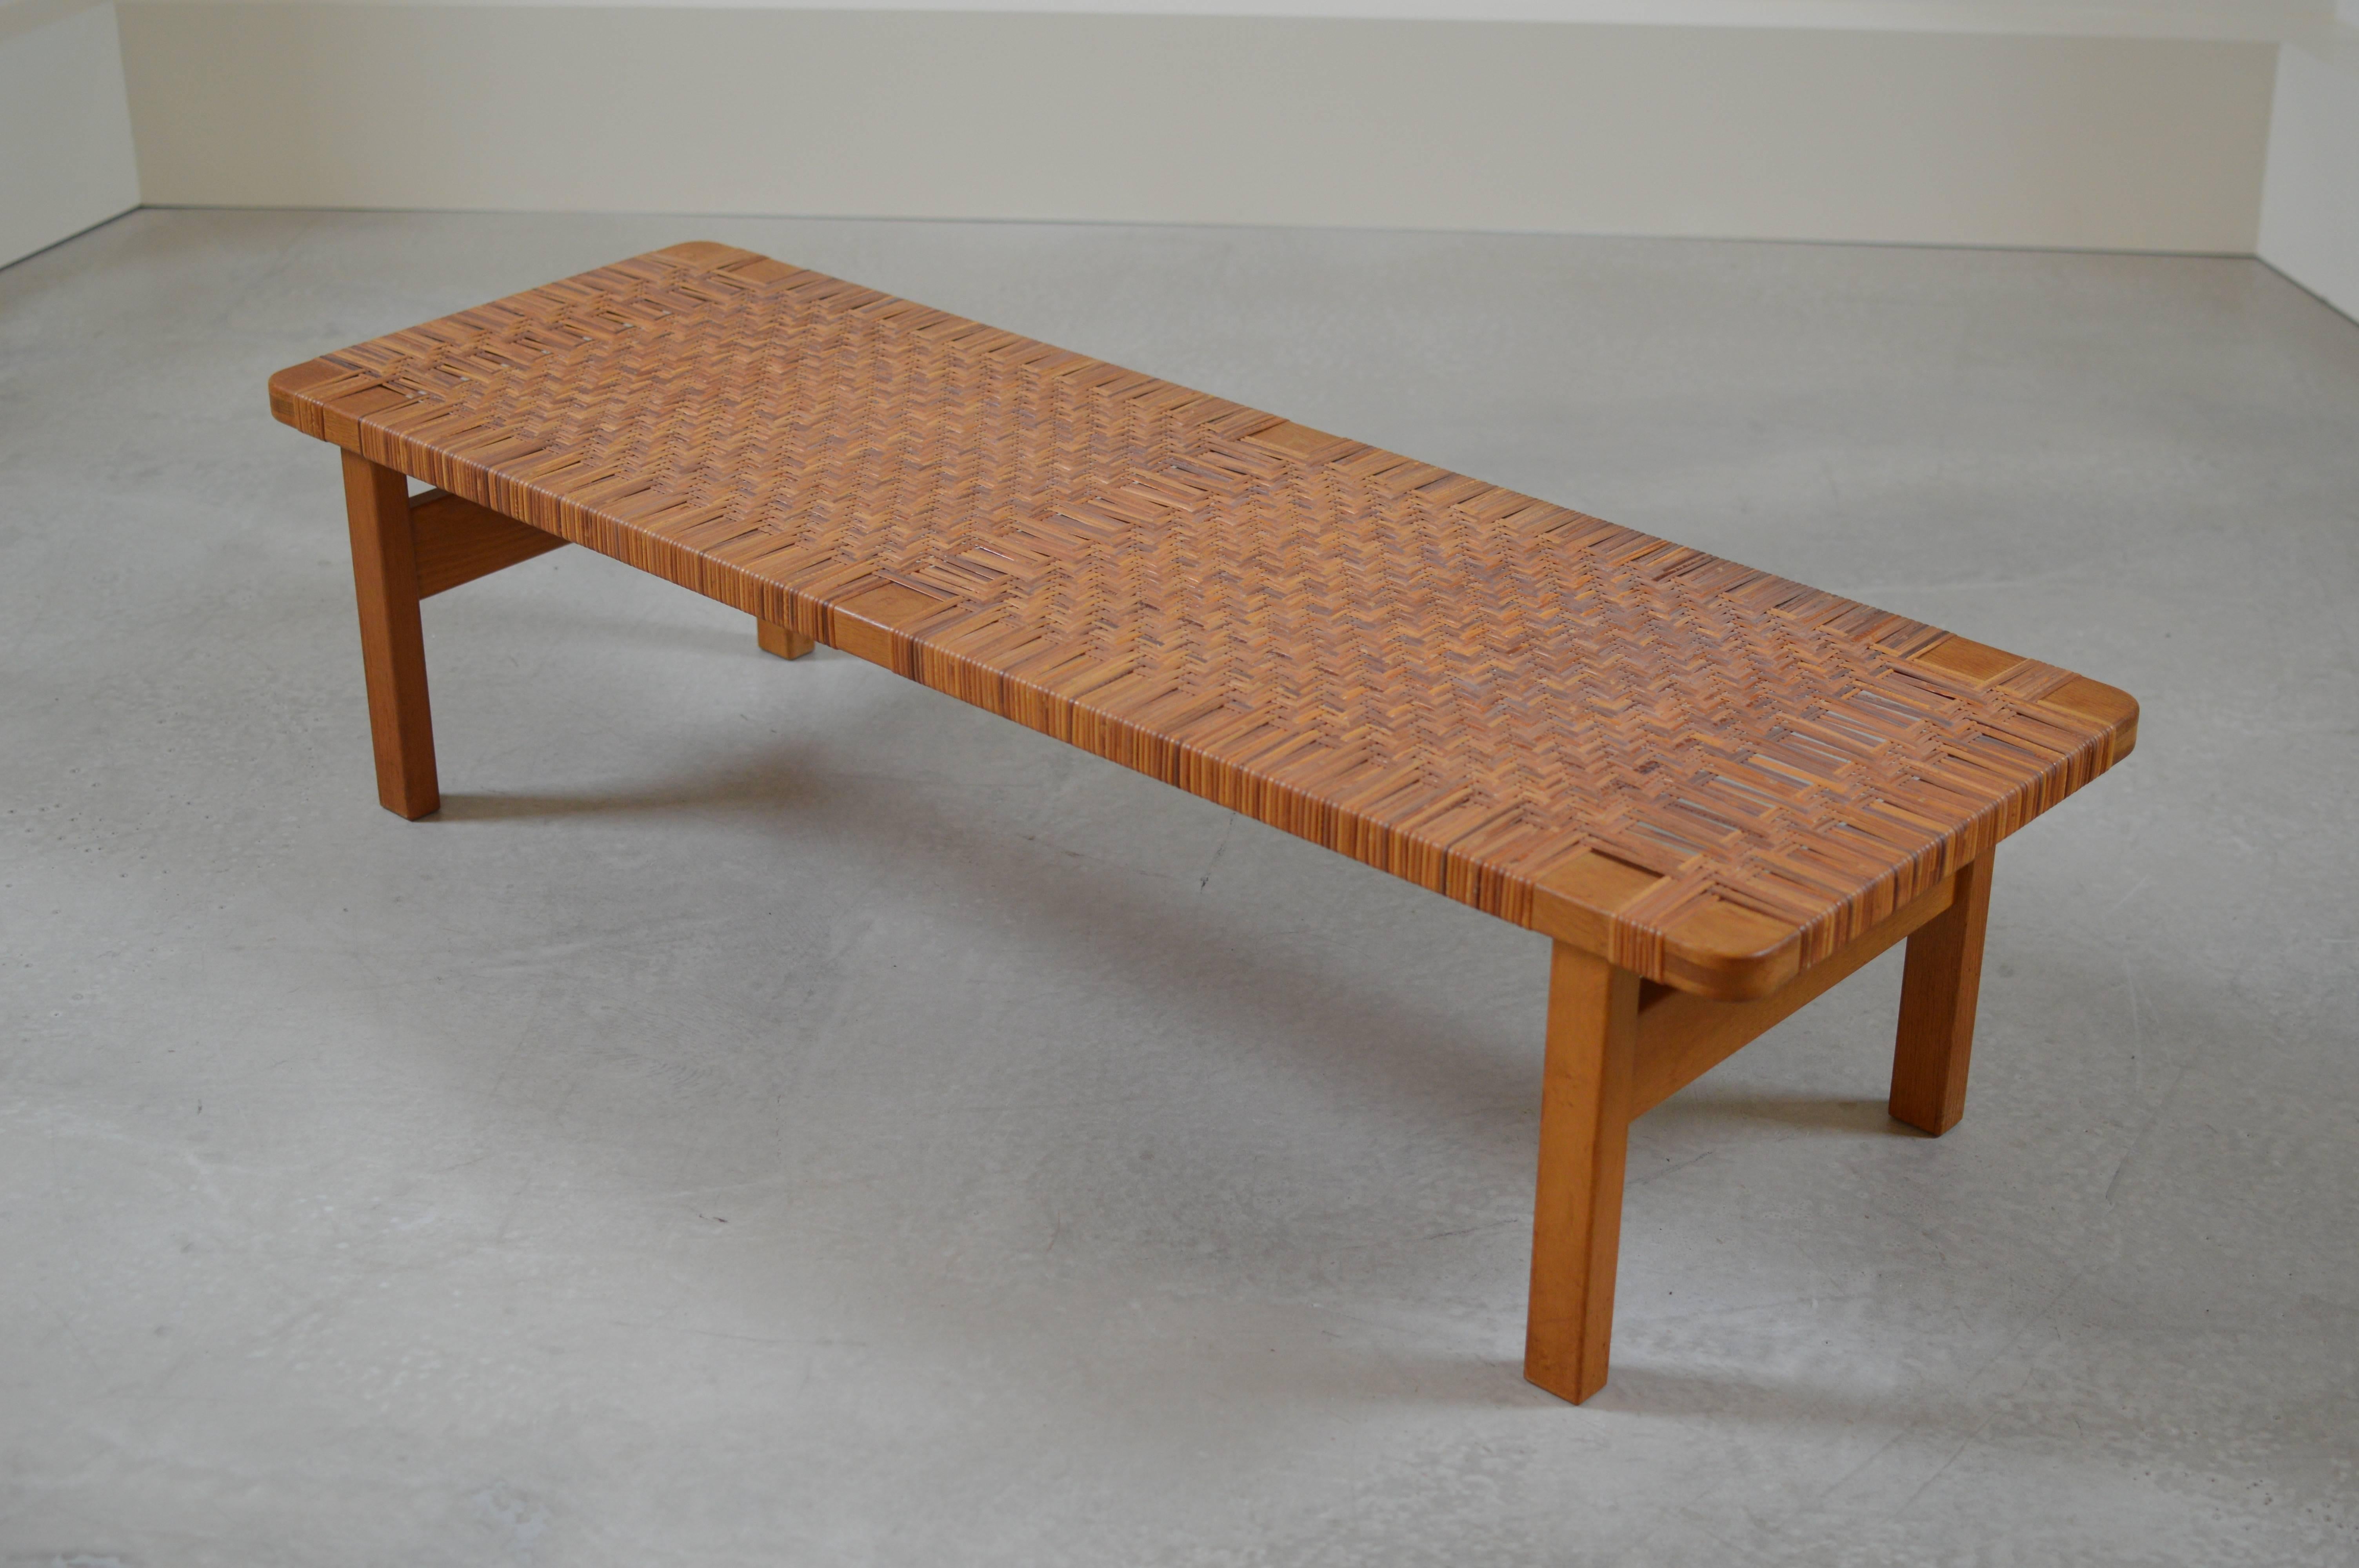 Bench or side table model 5272 originally designed in 1955 of woven cane and solid oak by Børge Mogensen for Fredericia Furniture. Excellent condition.

Two large benches and one small sized bench or side tables available.

